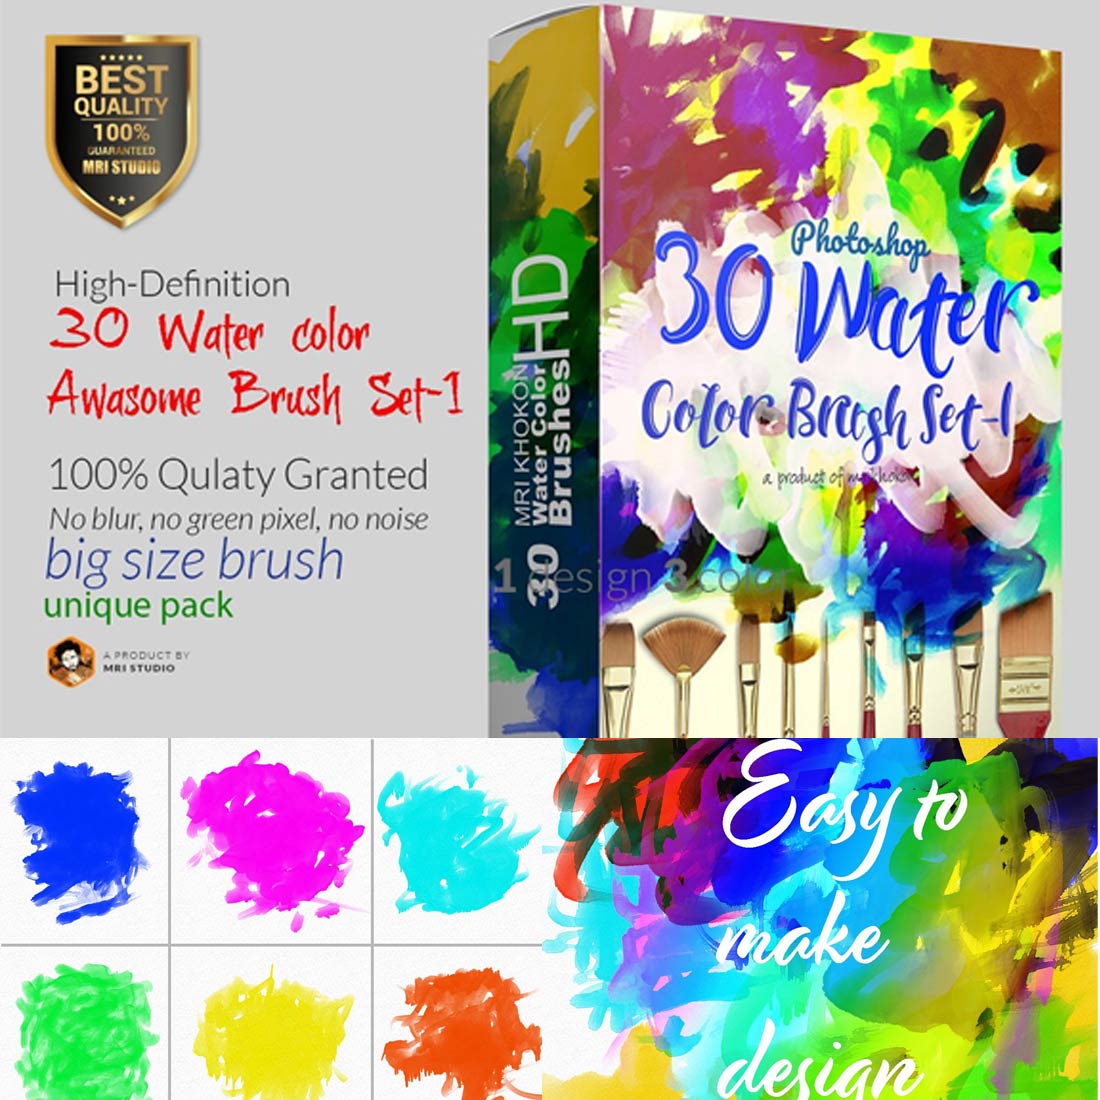 Water color Awesome Brush Set-1 cover image.